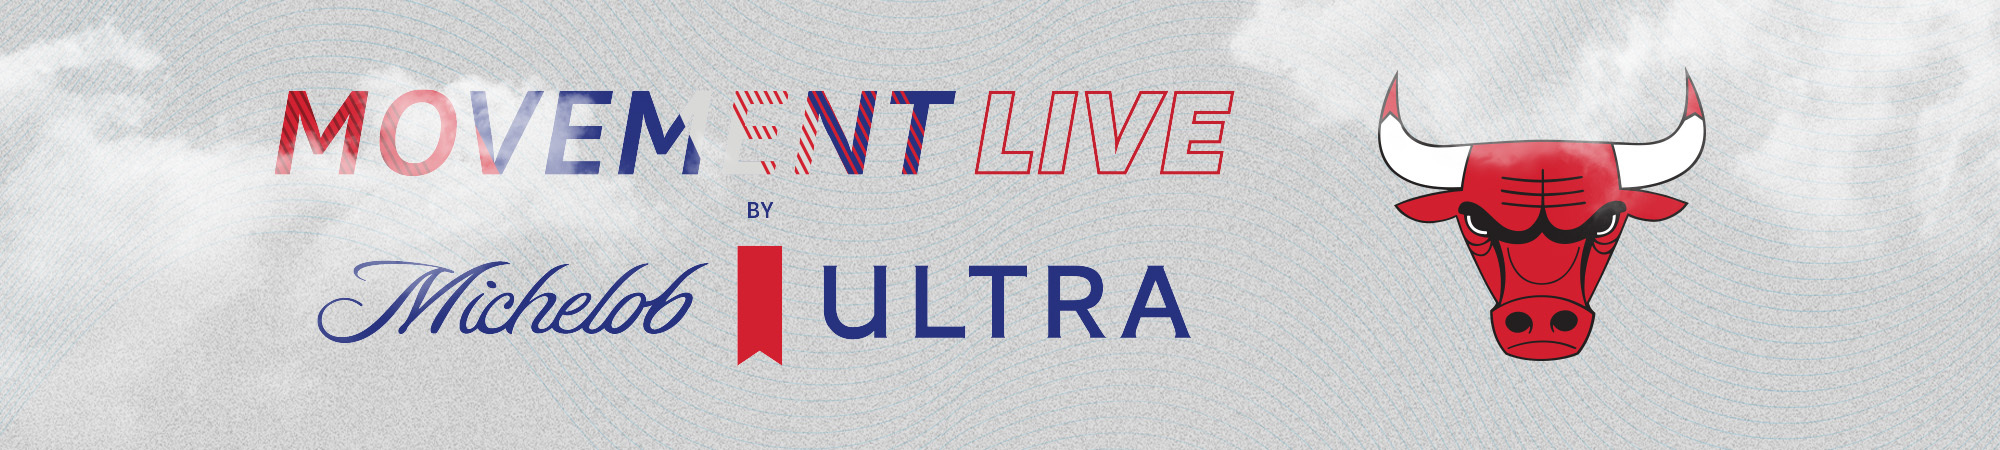  Movement Live by Michelob ULTRA.